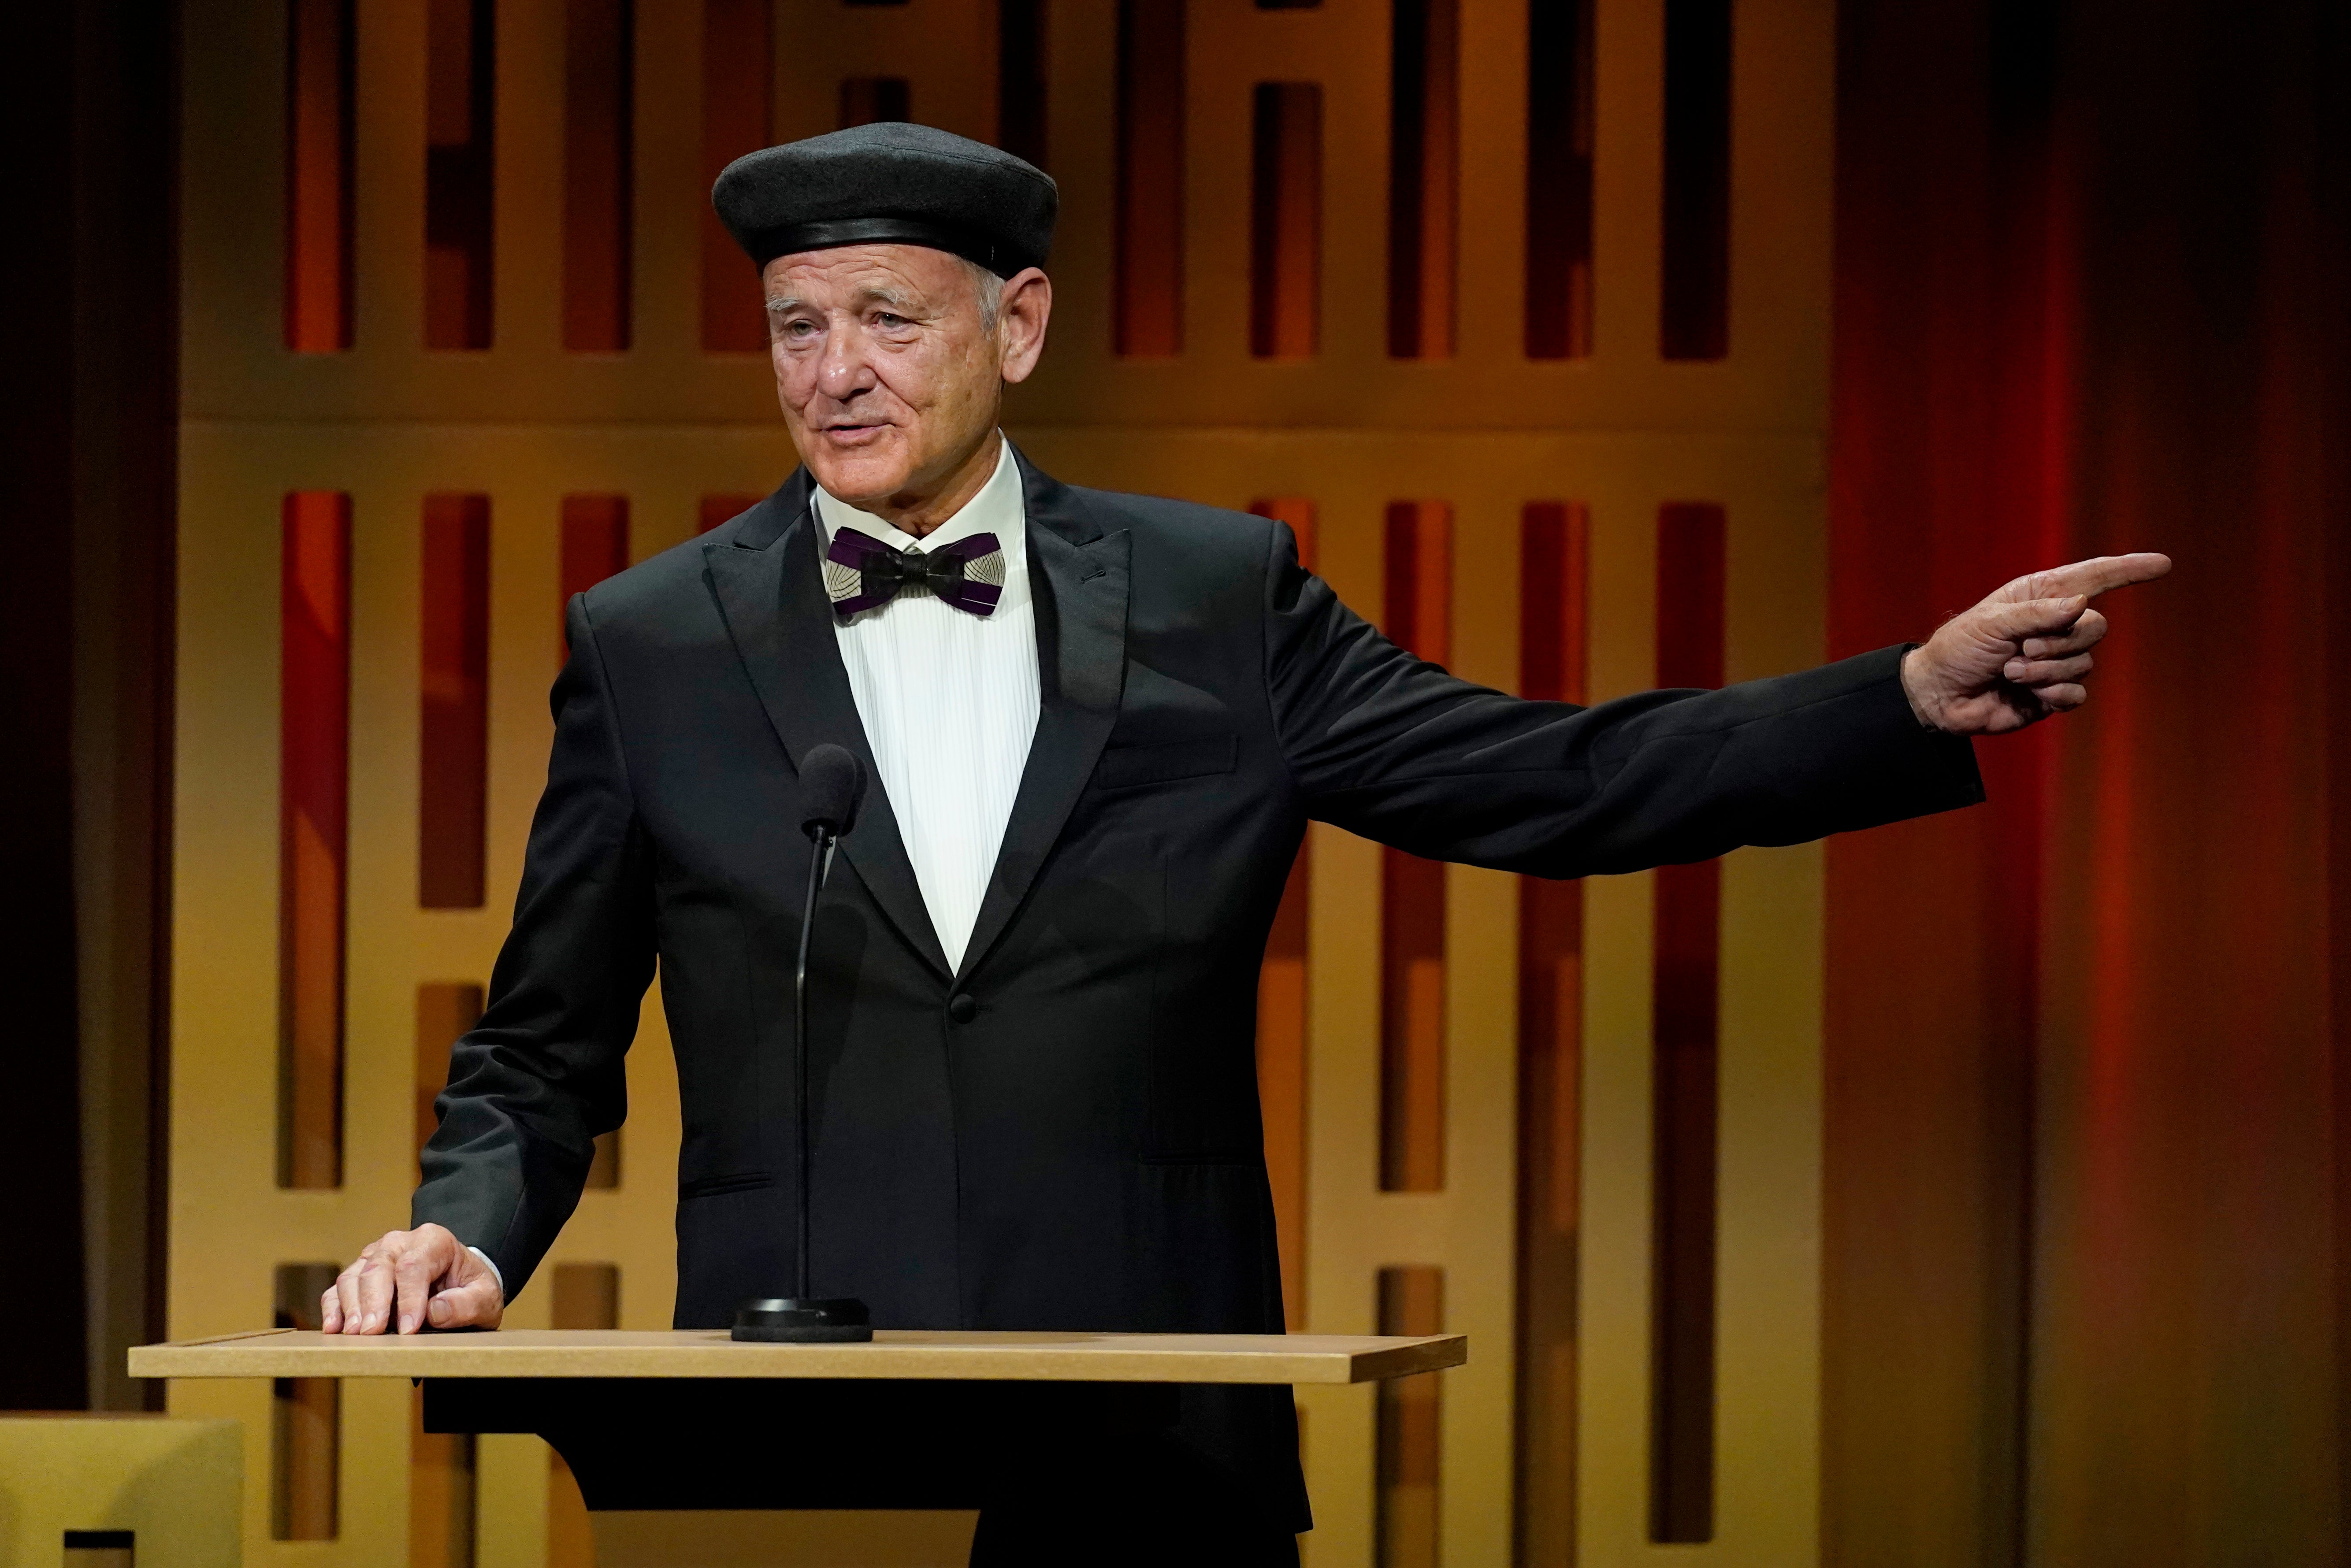 Bill Murray speaks at the Governors Awards on Friday, March 25, 2022, at the Dolby Ballroom in Los Angeles